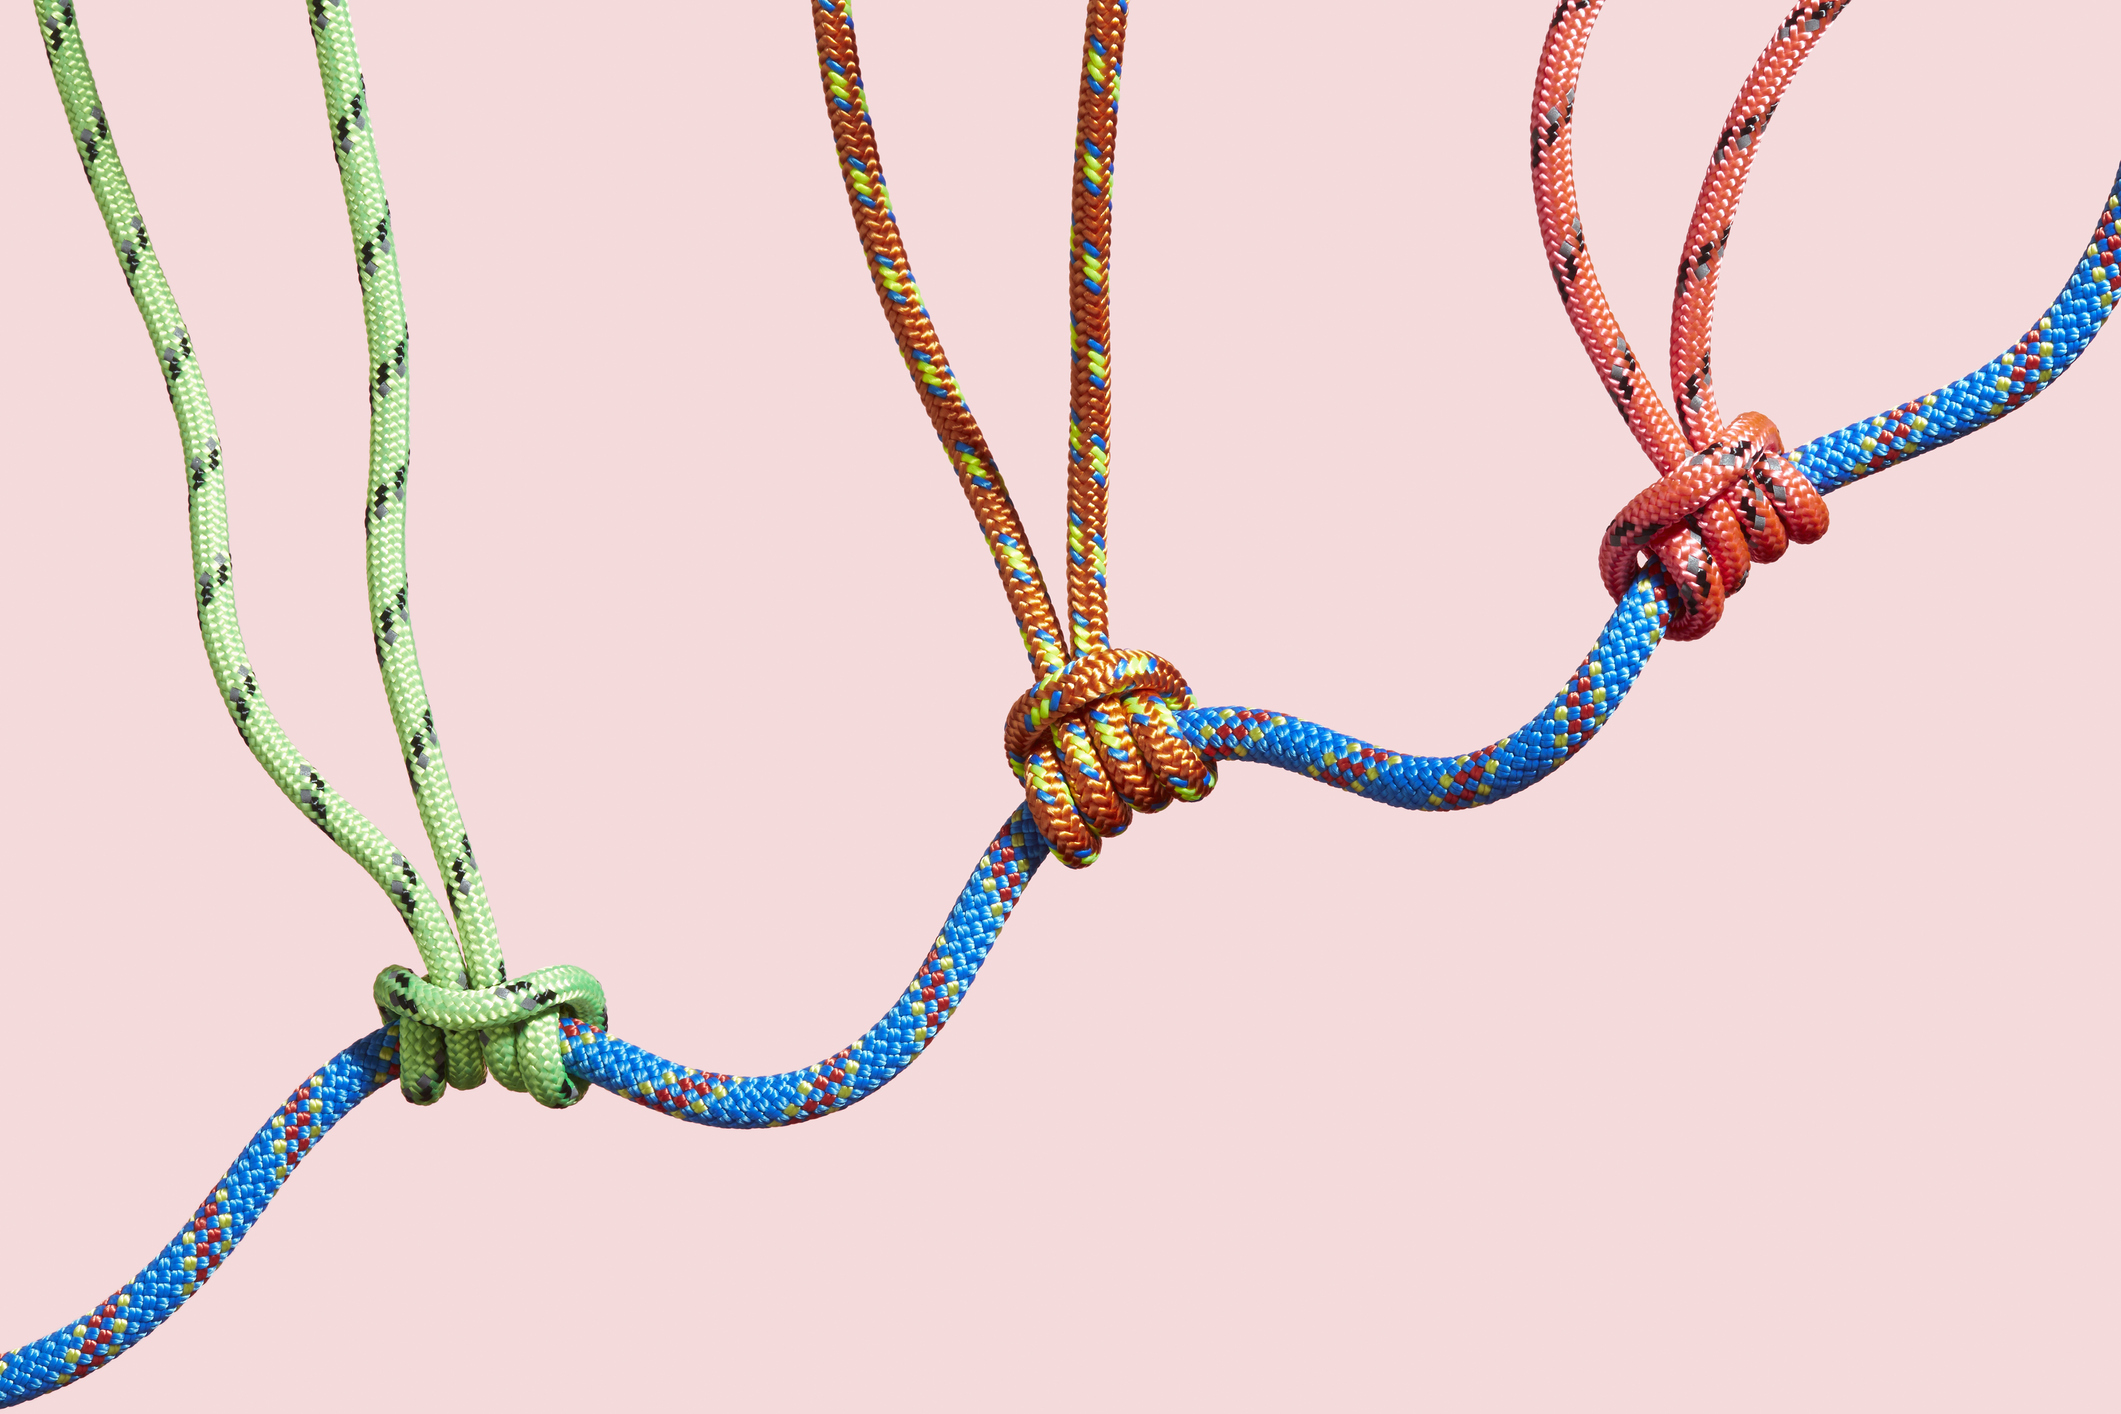 Three colored ropes supporting a larger rope